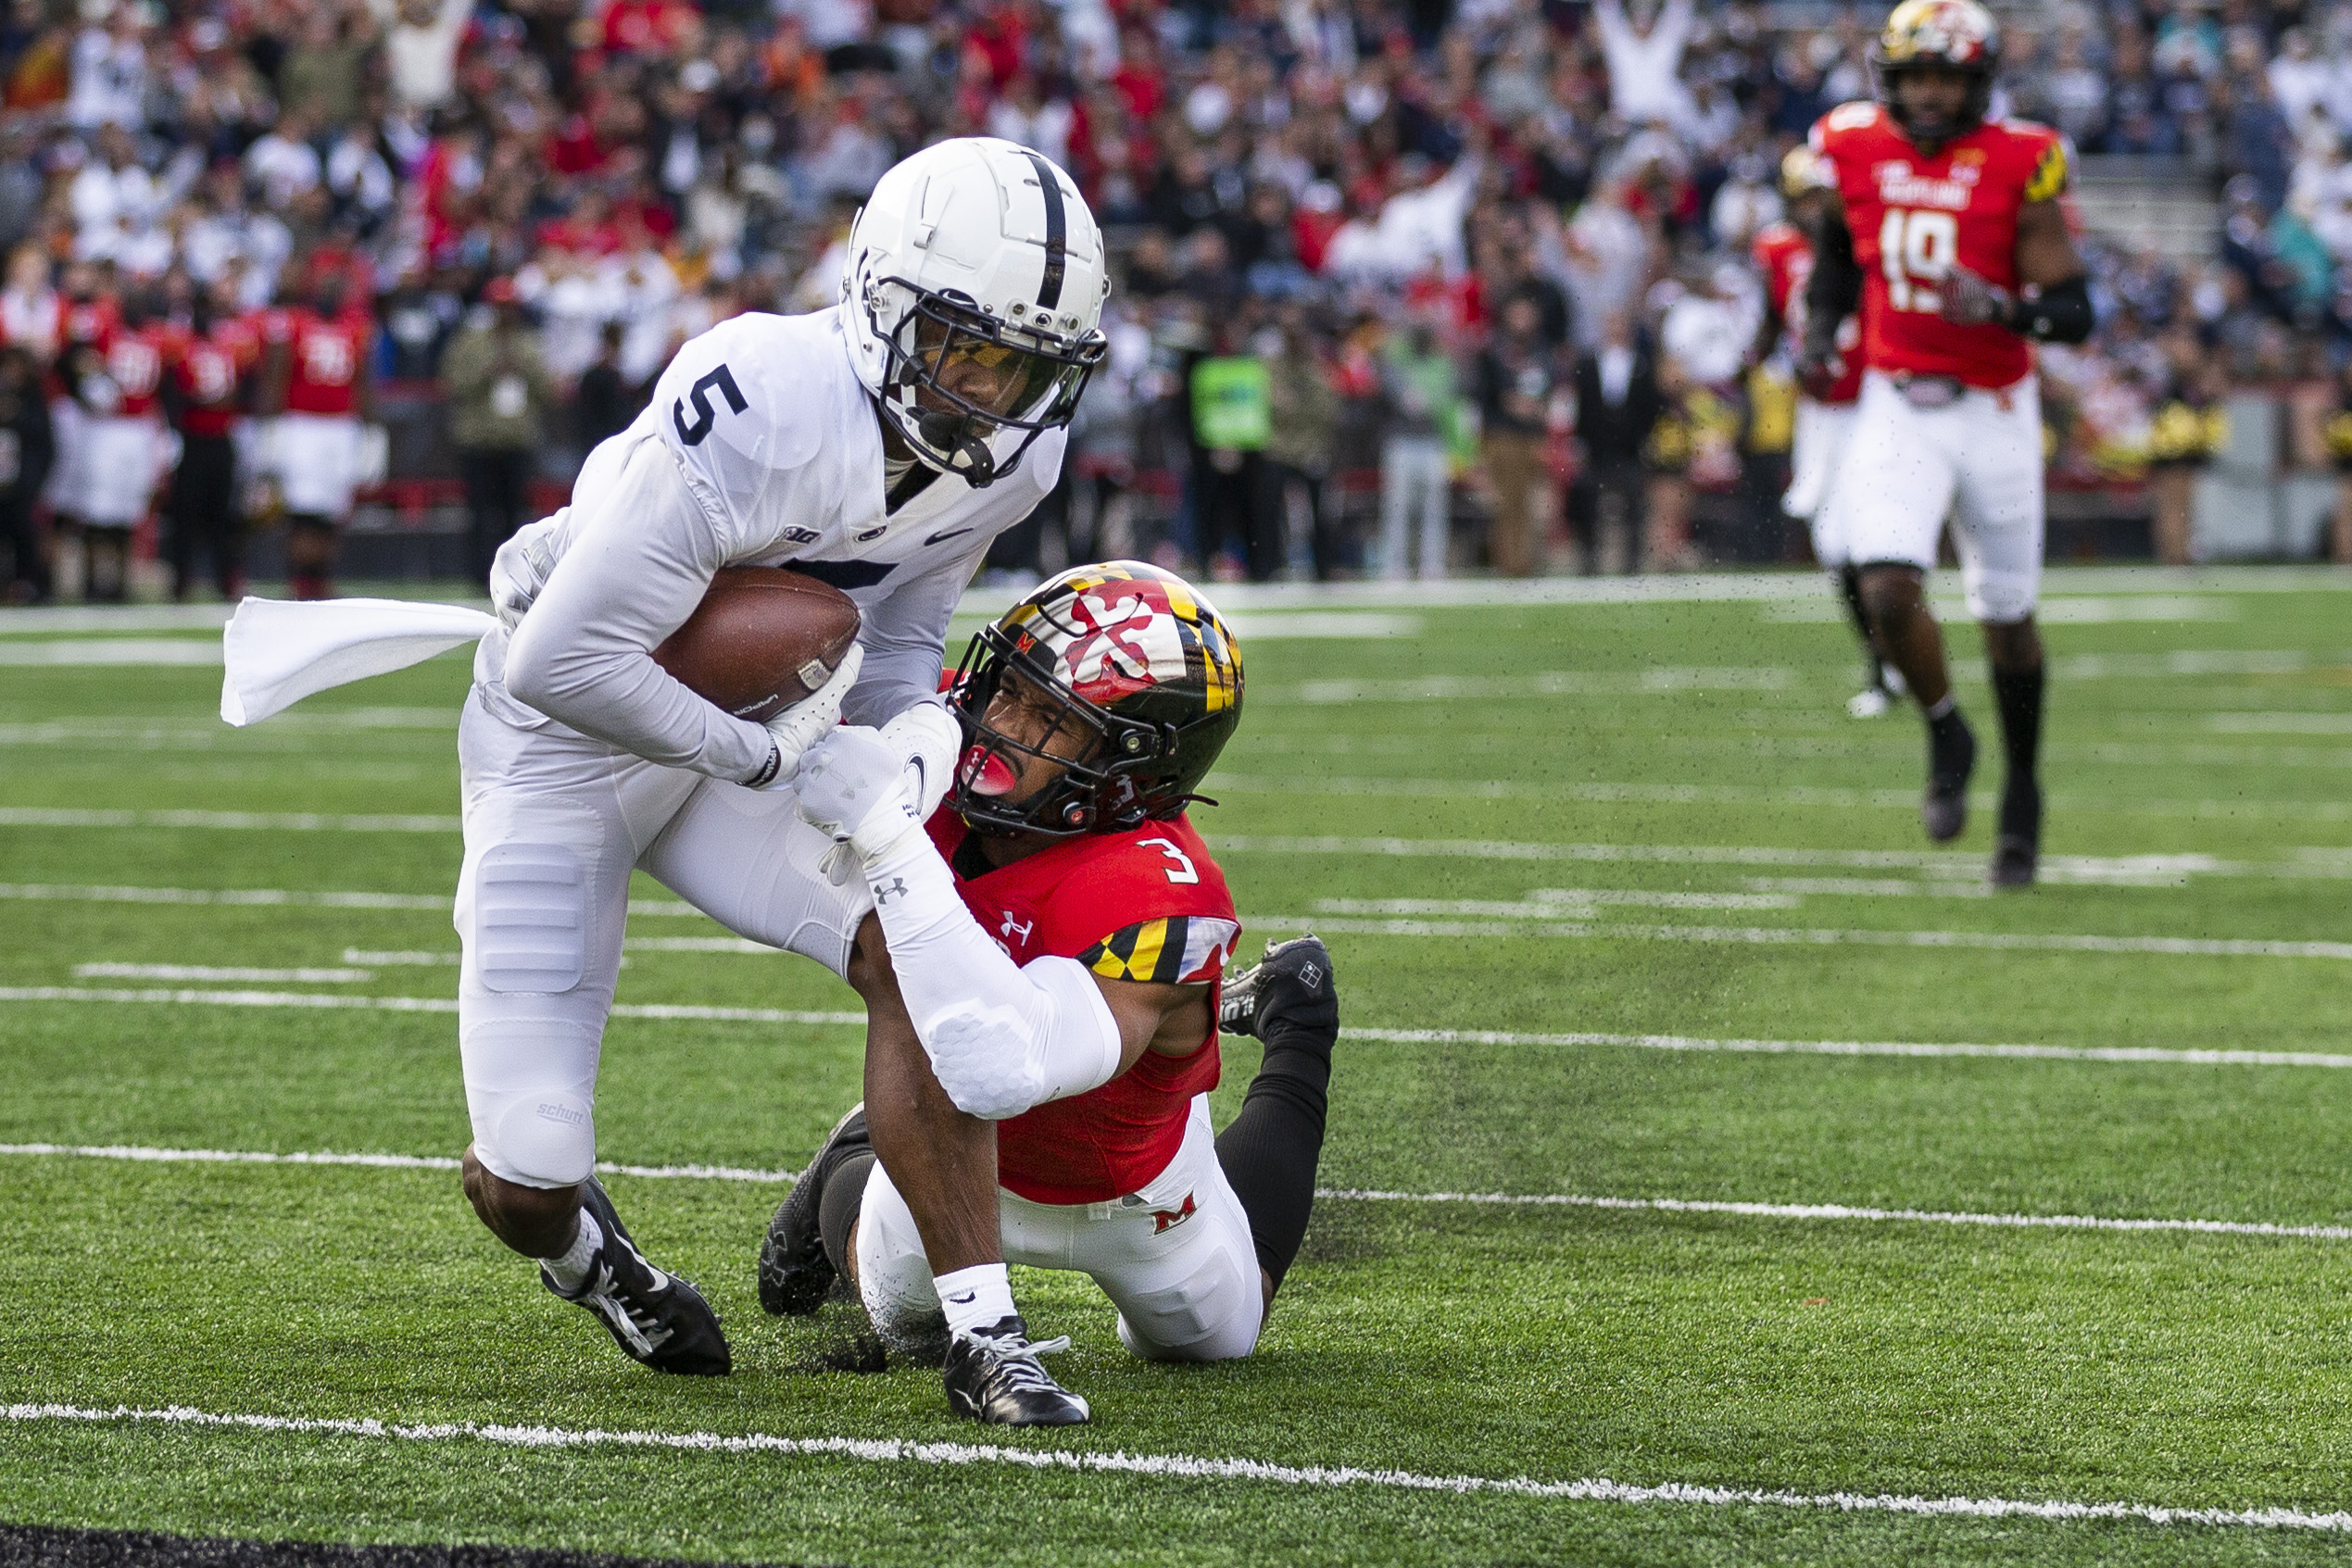 Penn State wide receiver Jahan Dotson goes in for a 38-yard touchdown catch and run as Maryland defensive back Nick Cross defends during the first quarter on Nov. 6, 2021. Joe Hermitt | jhermitt@pennlive.com